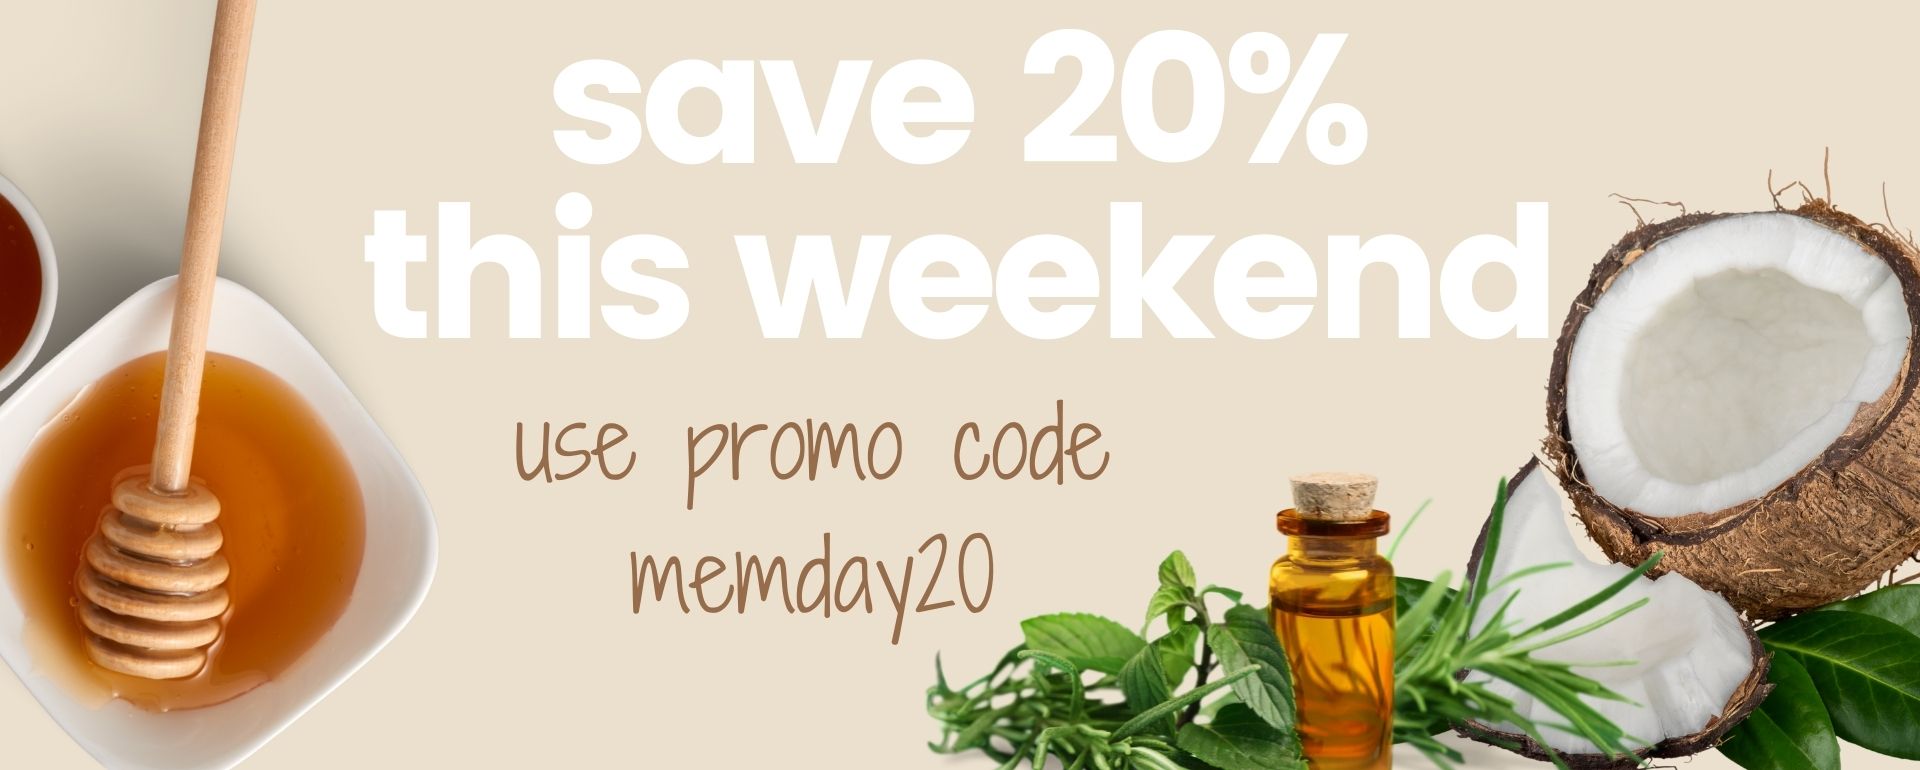 use promo code memday20 and save 20% all weekend!